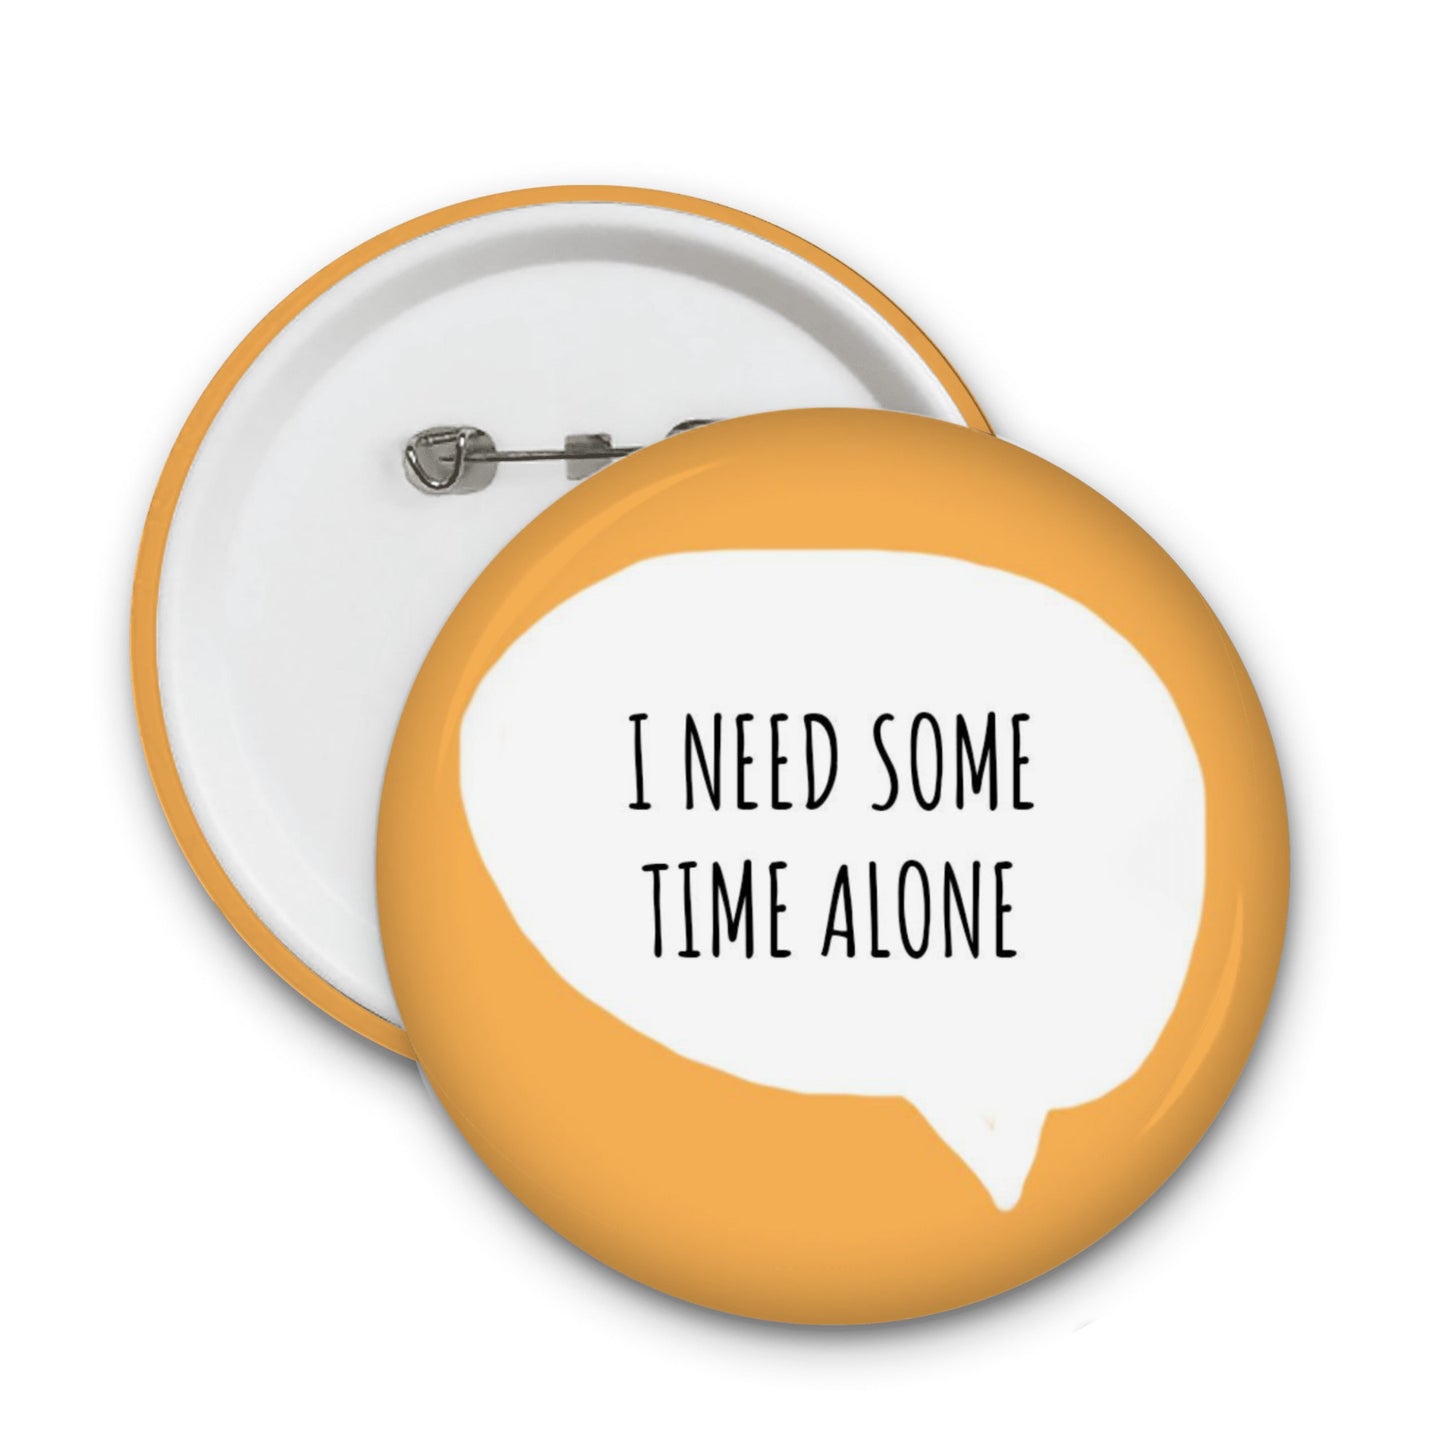 I need some time alone badge